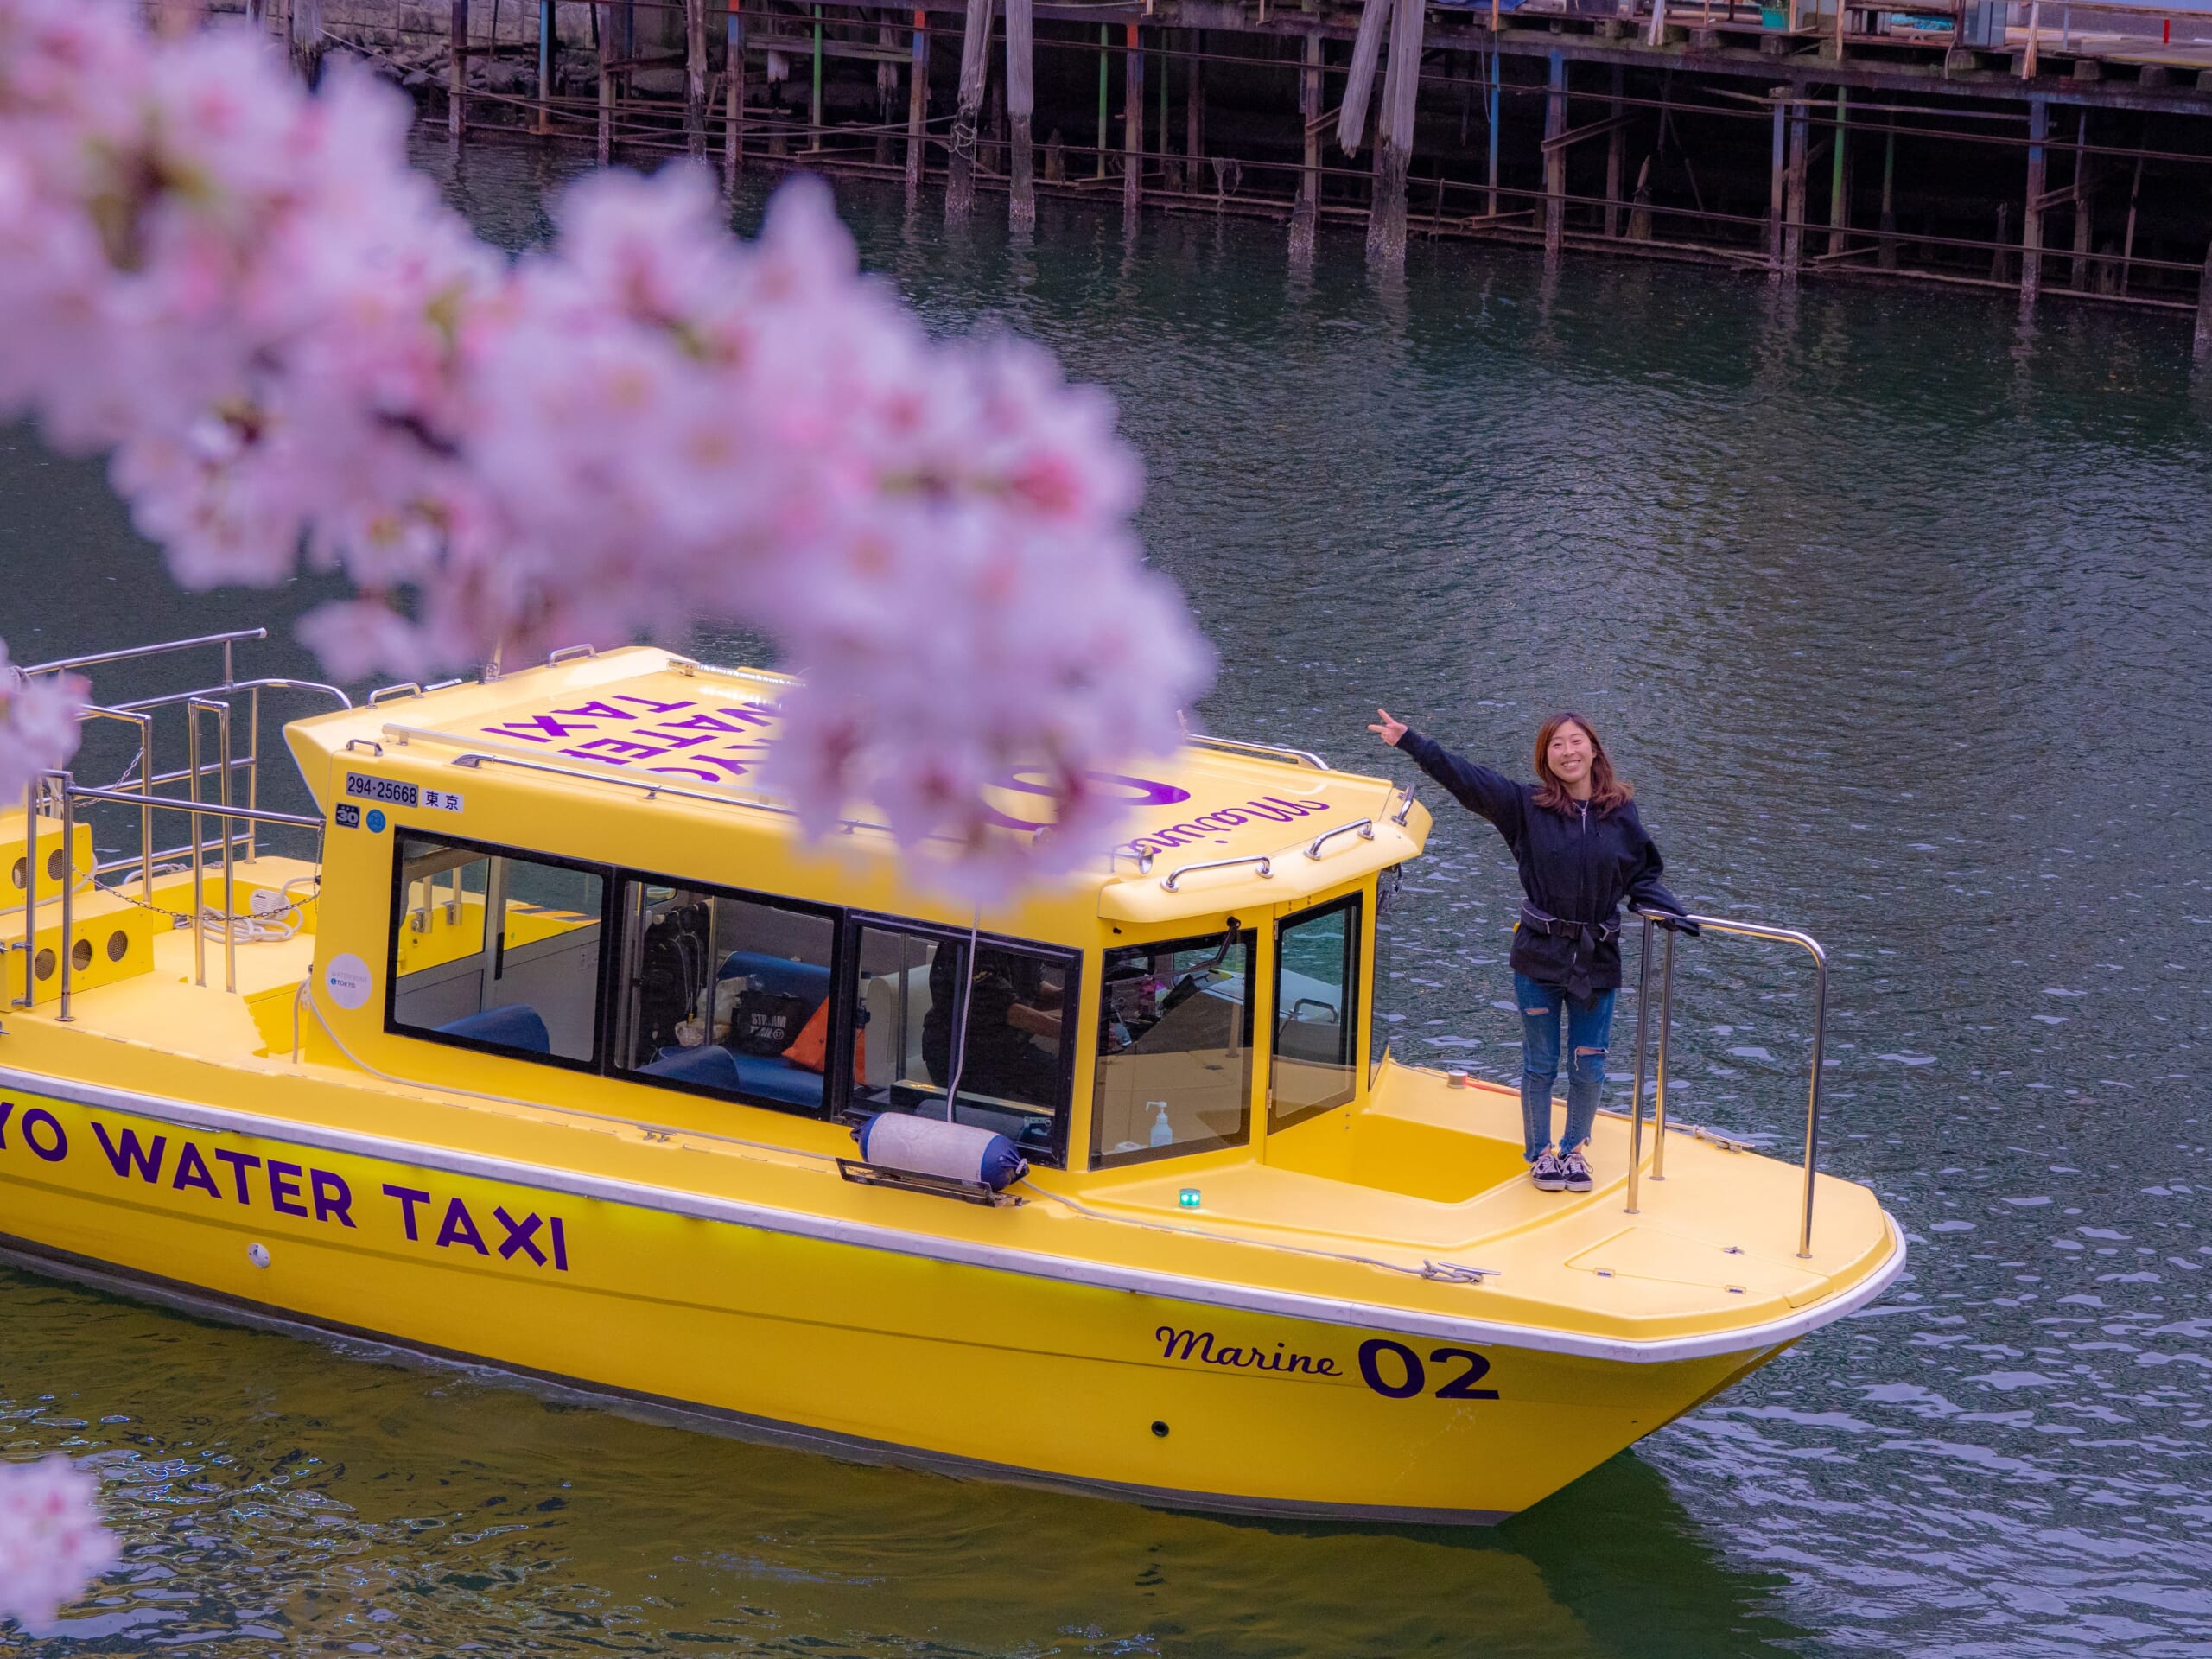 okyo Water Taxi Cherry Blossom